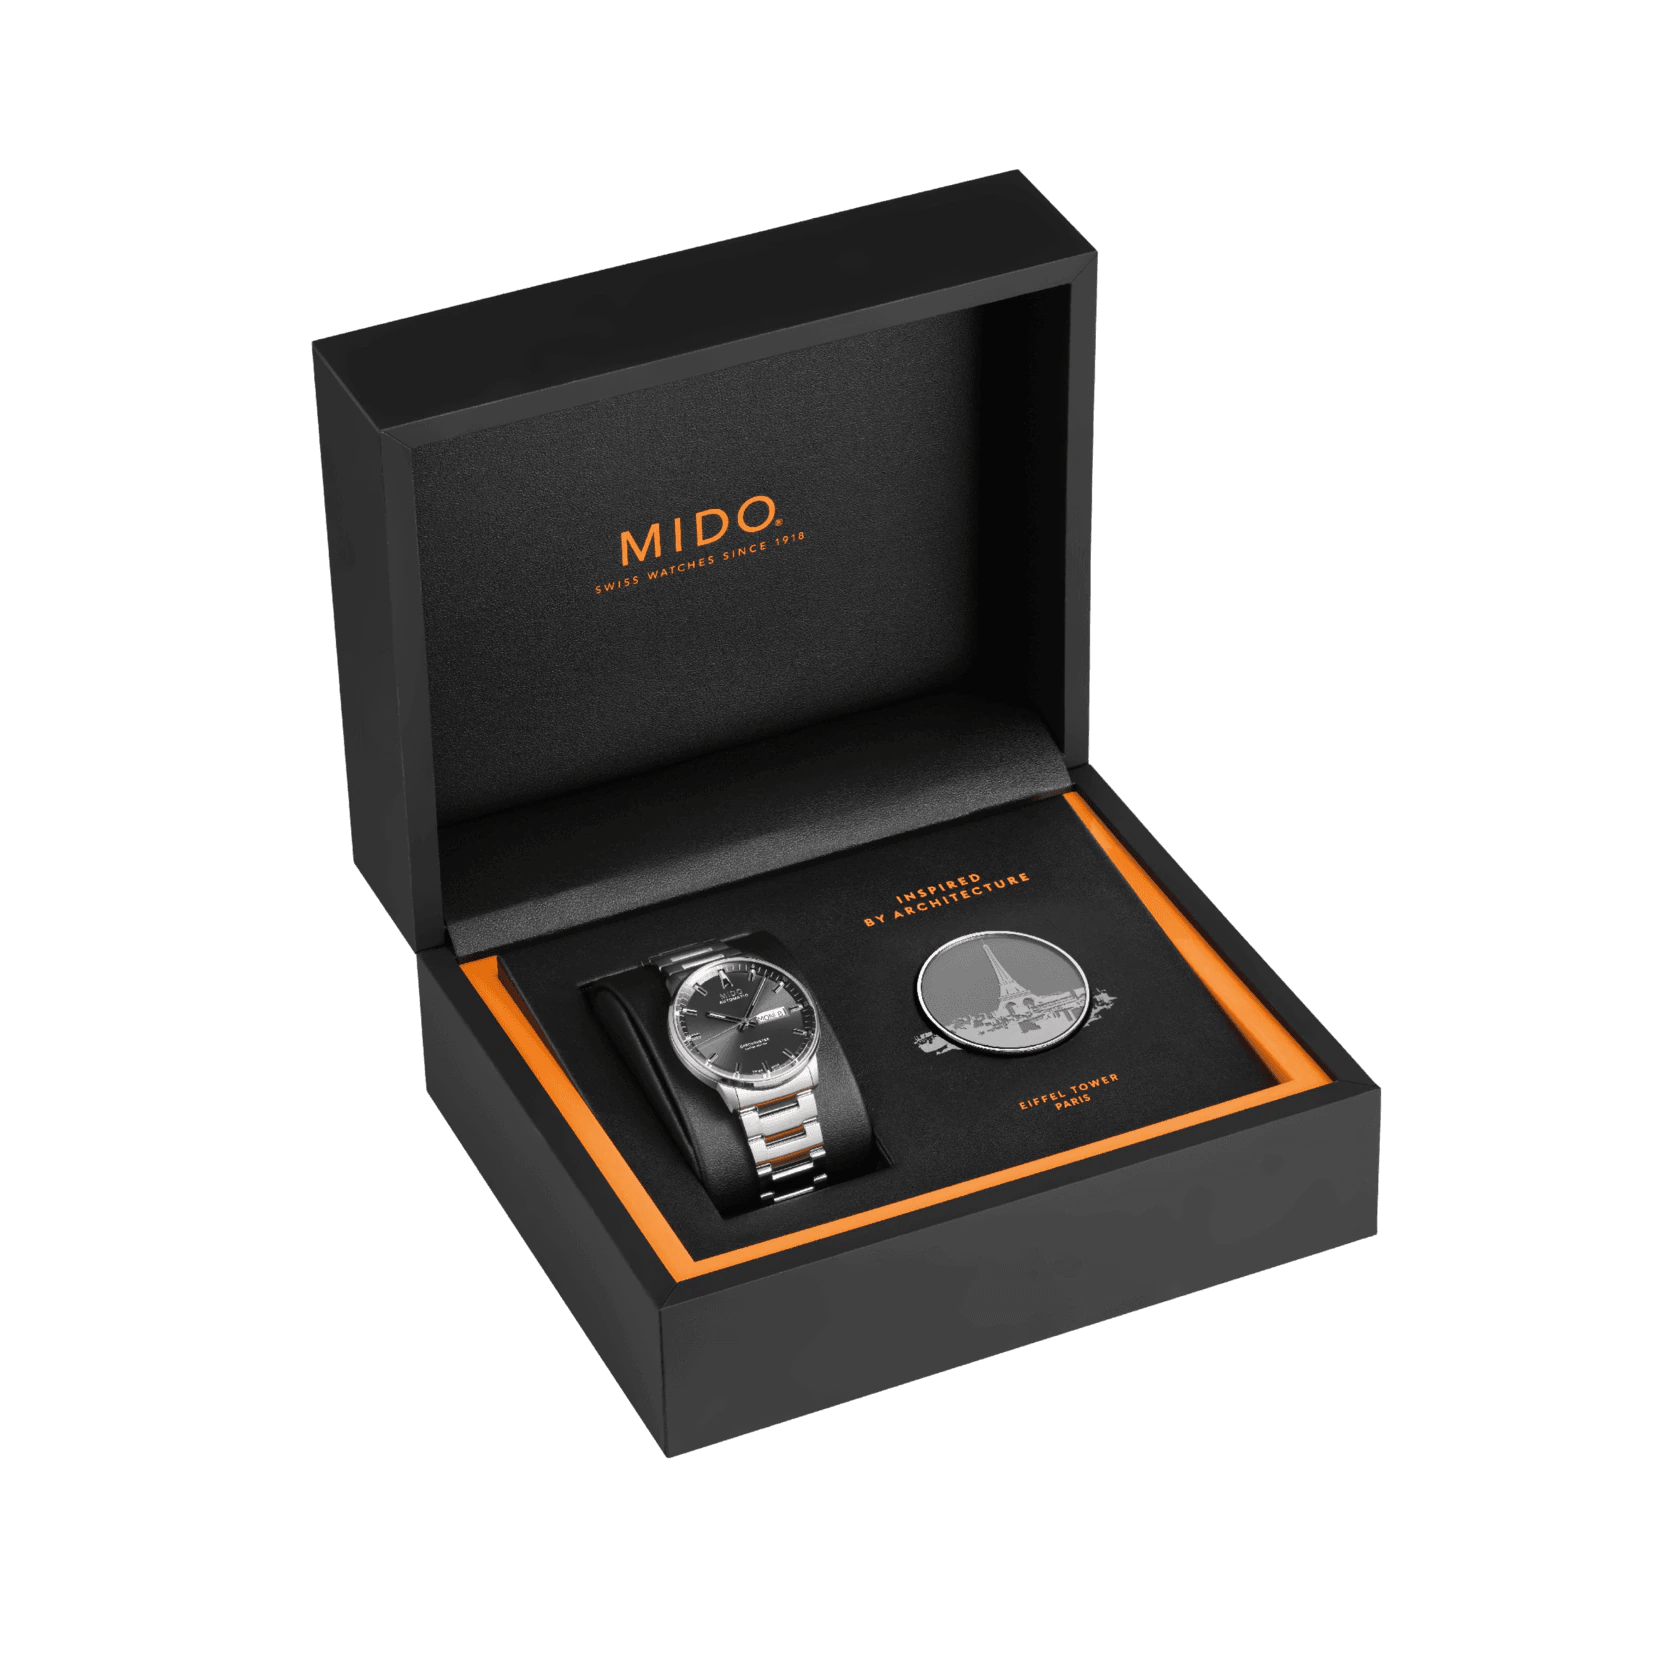 Mido Commander 20th Anniversary Inspired by Architecture Men's Watch M0214311106102